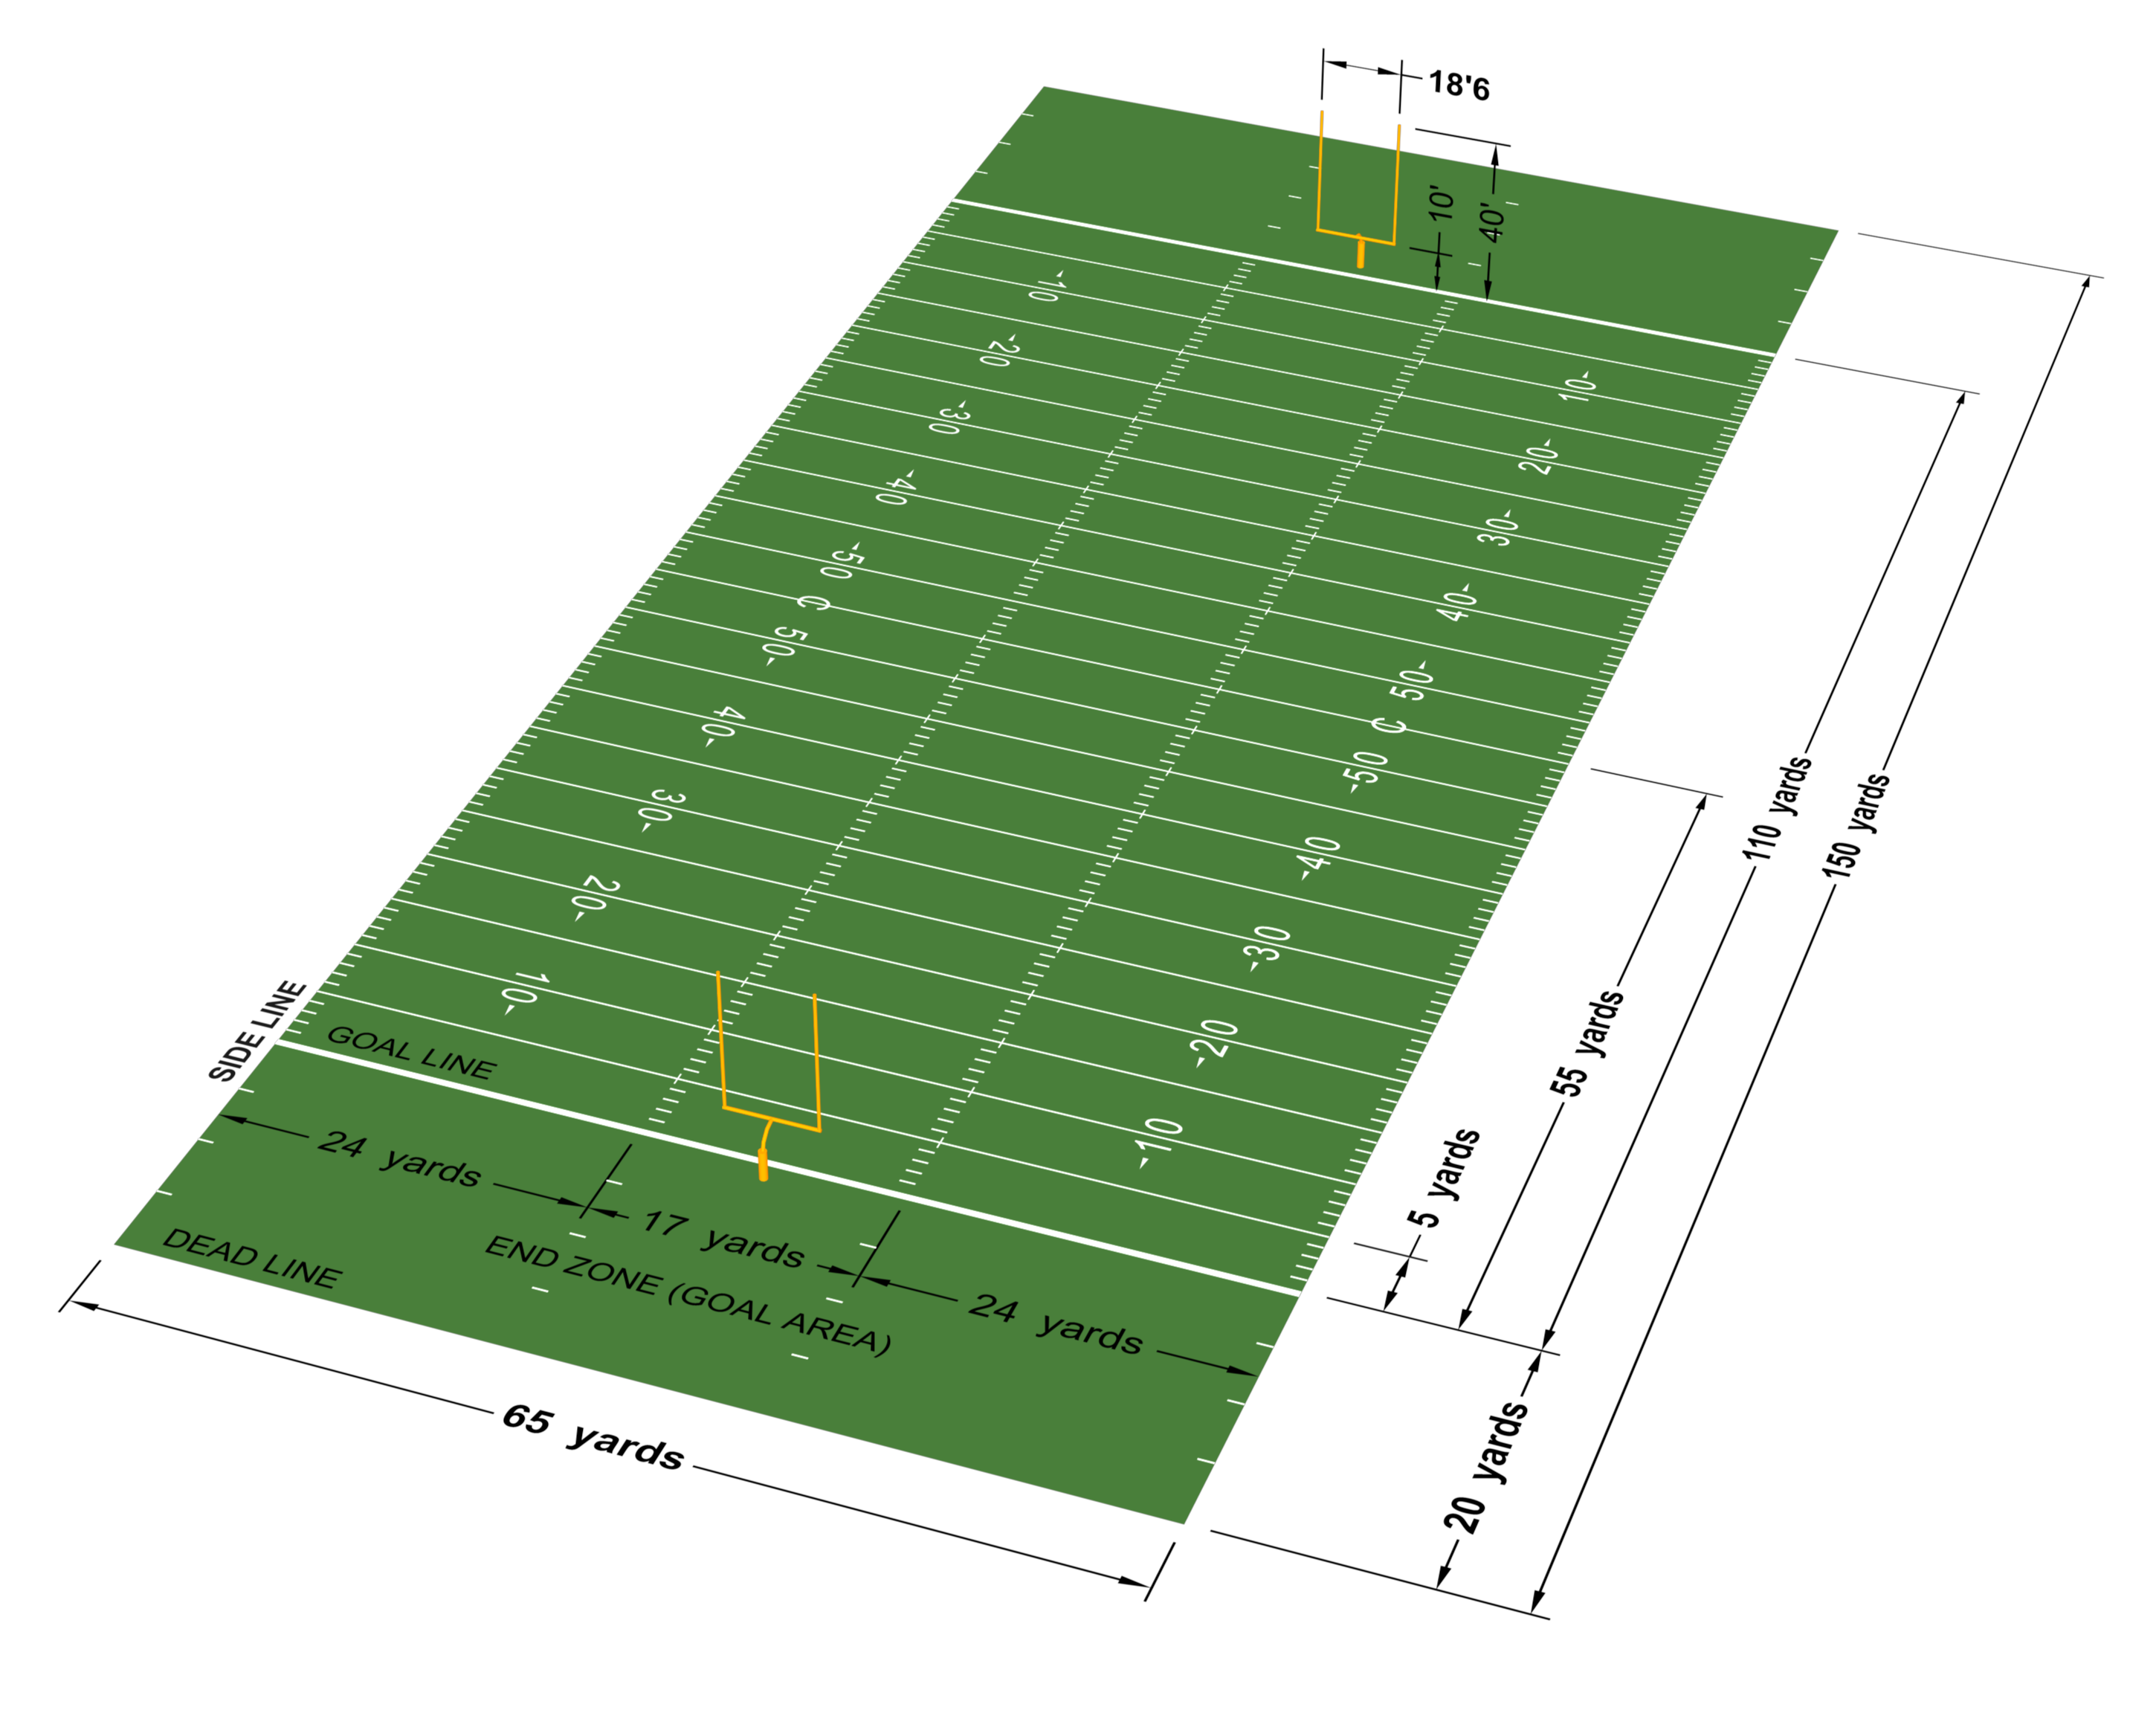 Photo: dimensions of canadian football field